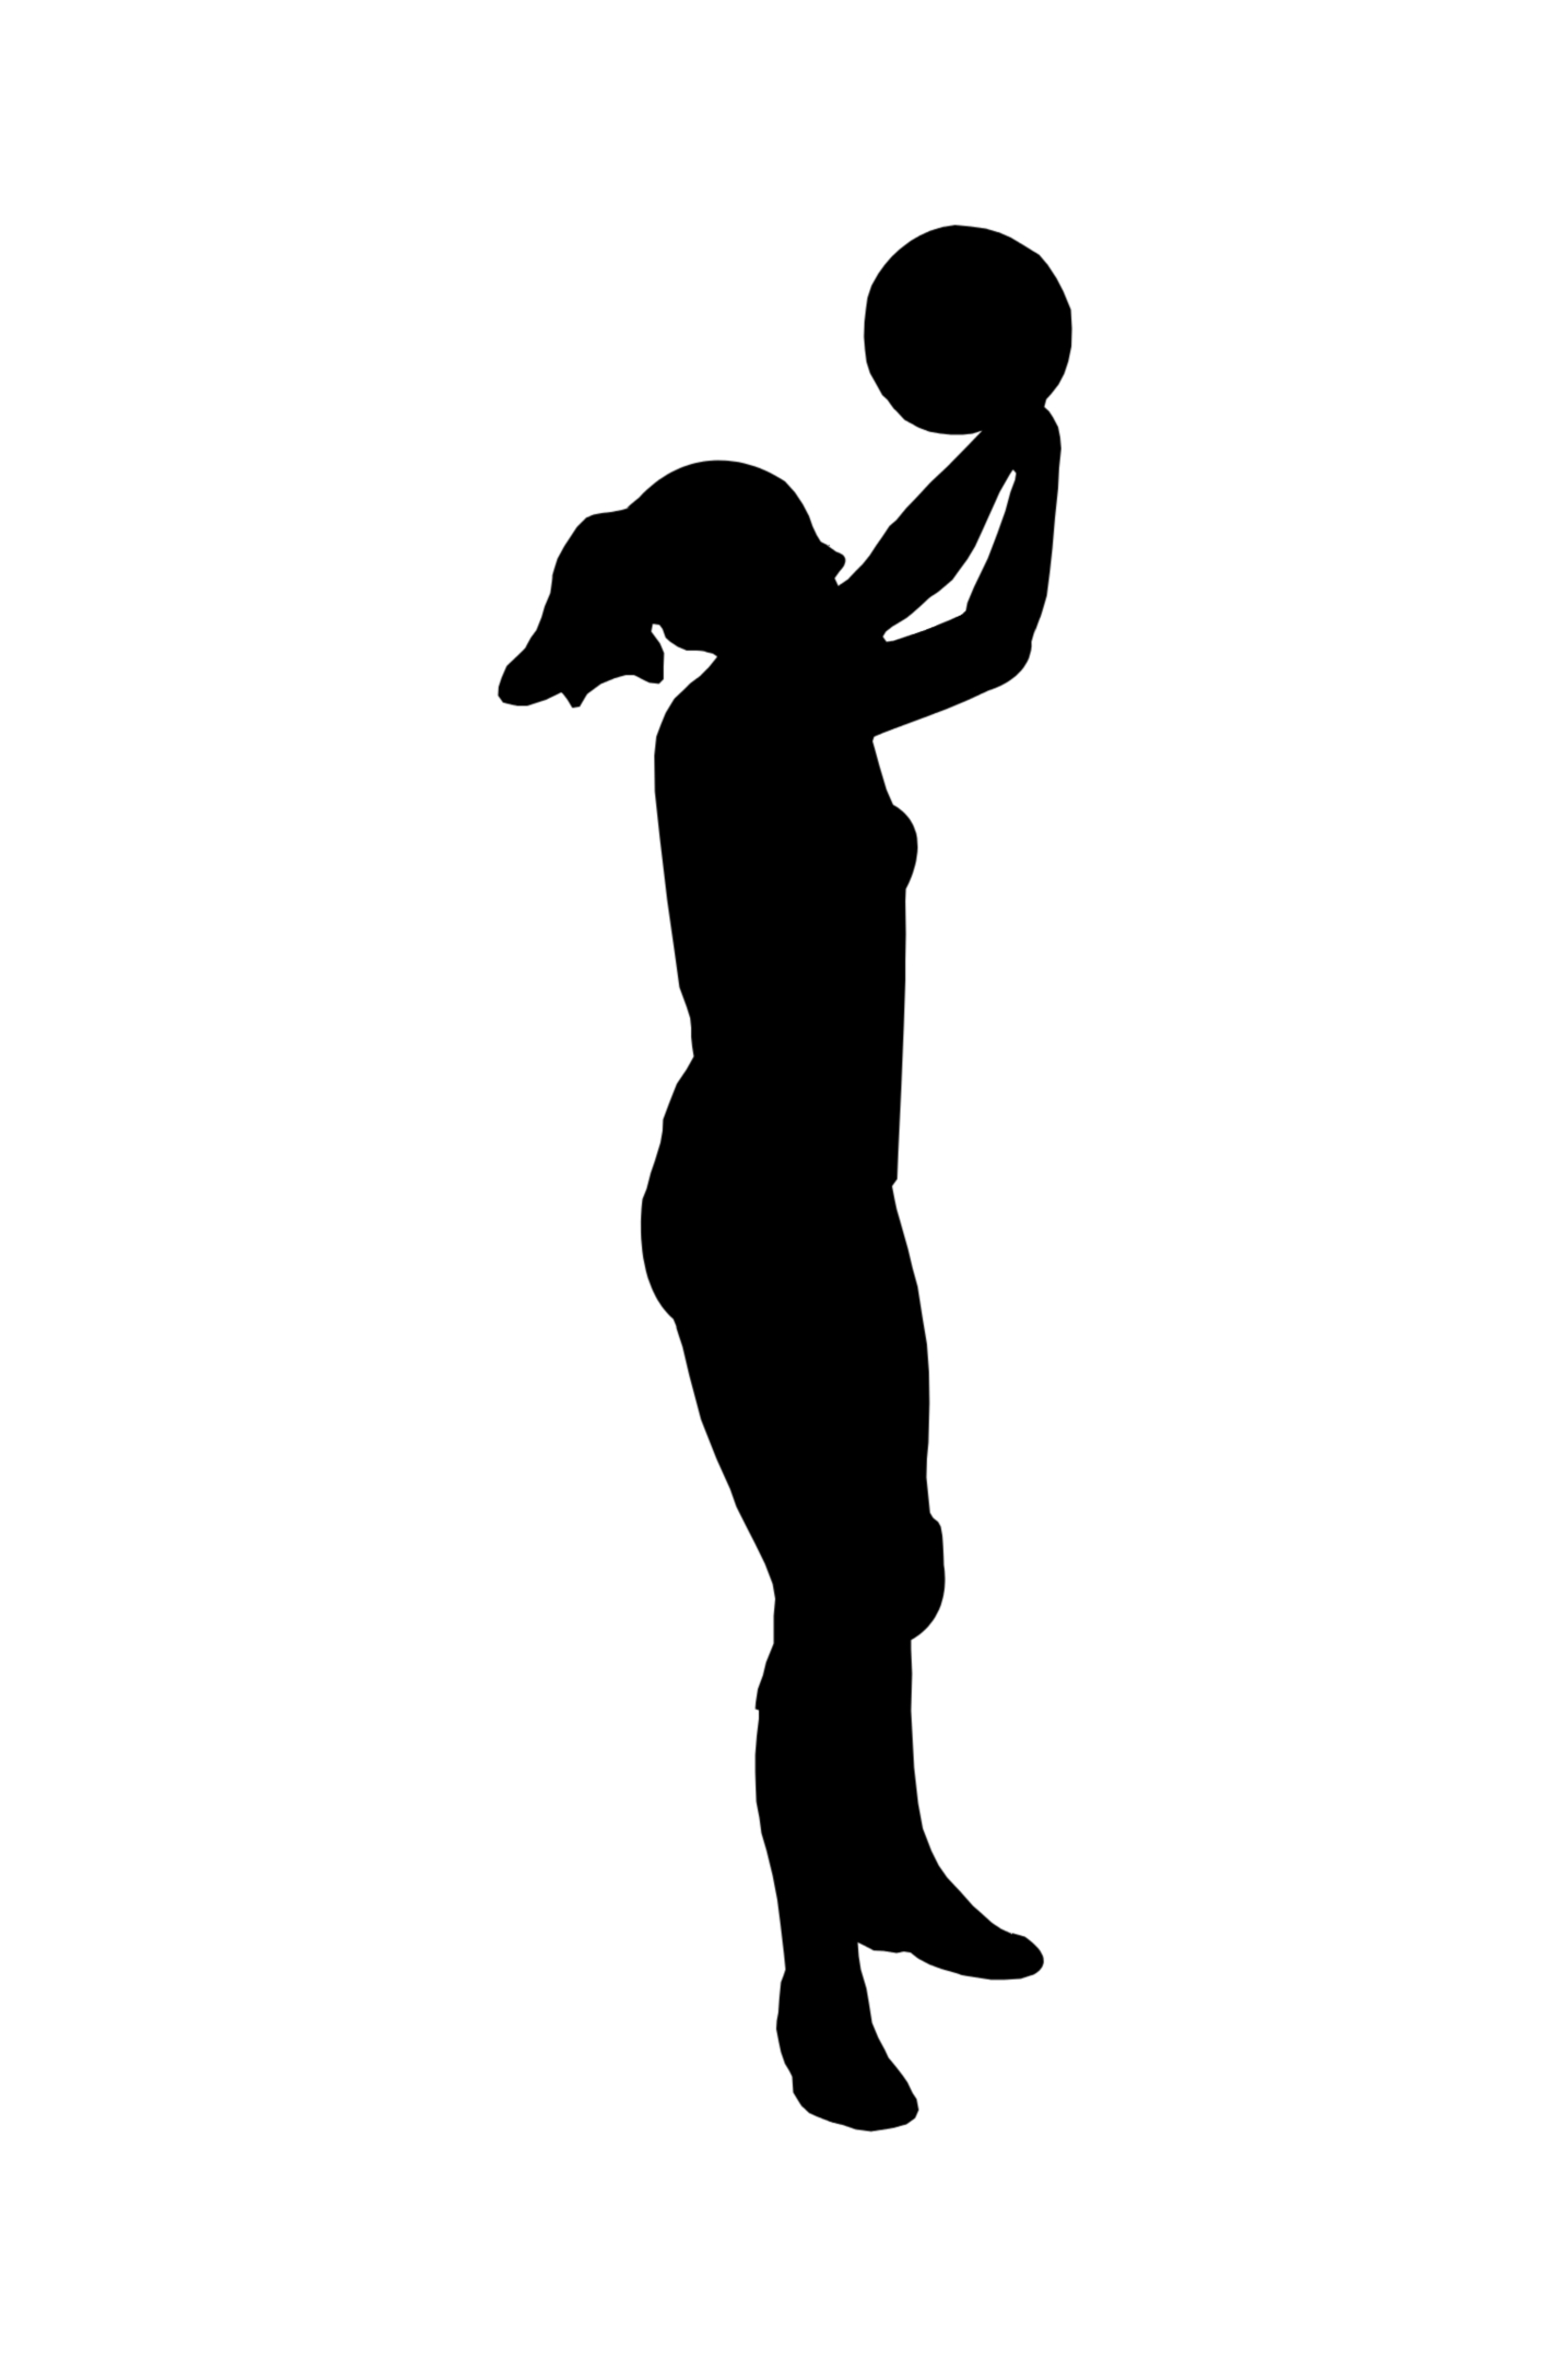 Go Back   Images For   Girl Basketball Player Silhouette Png